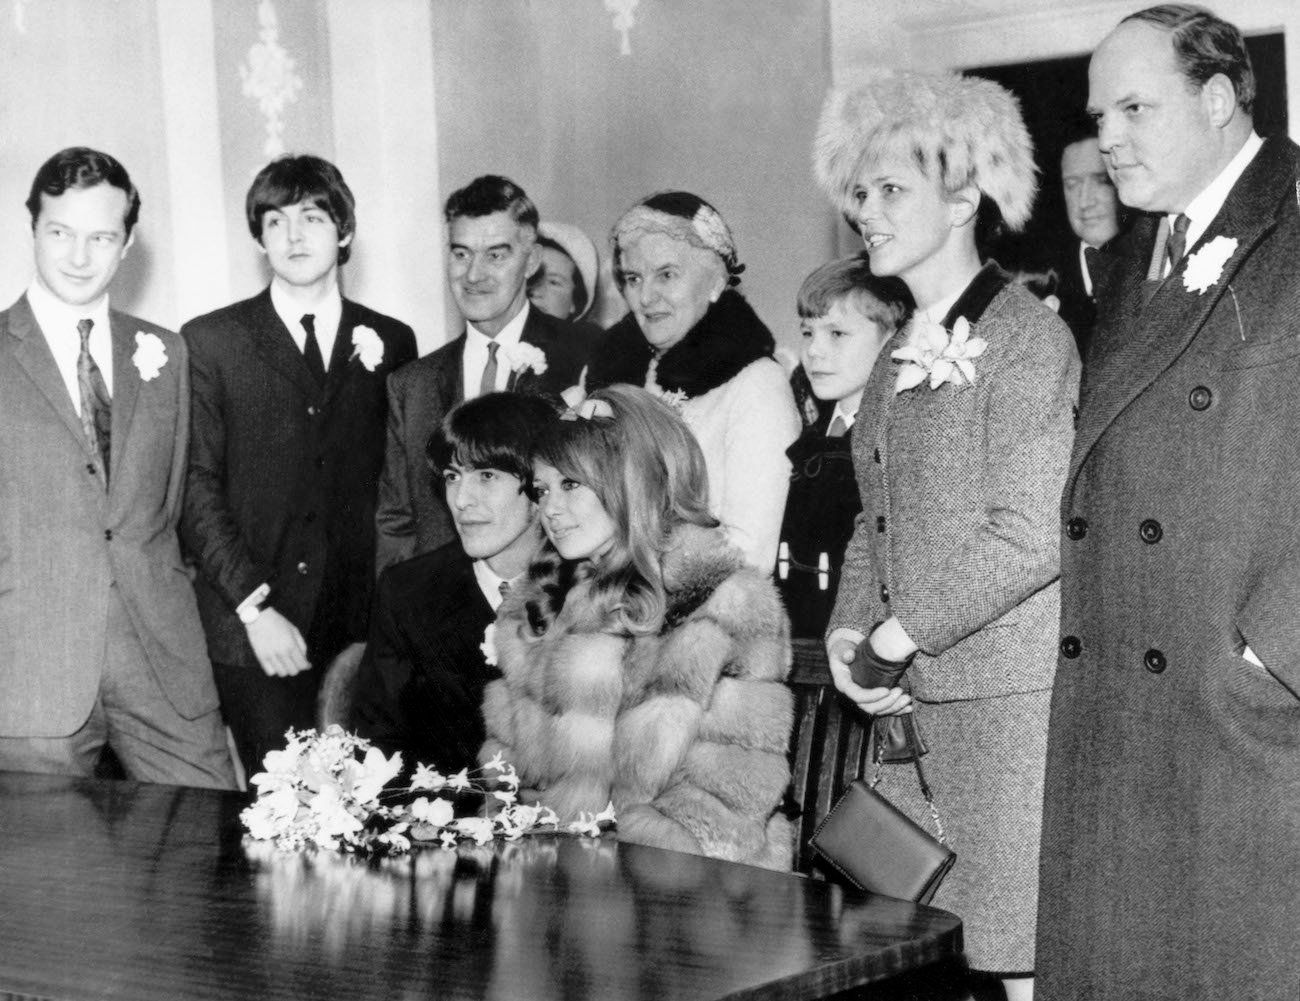 The Beatles' manager, Brian Epstein, and Paul McCartney at George Harrison and Pattie Boyd's wedding in 1966.